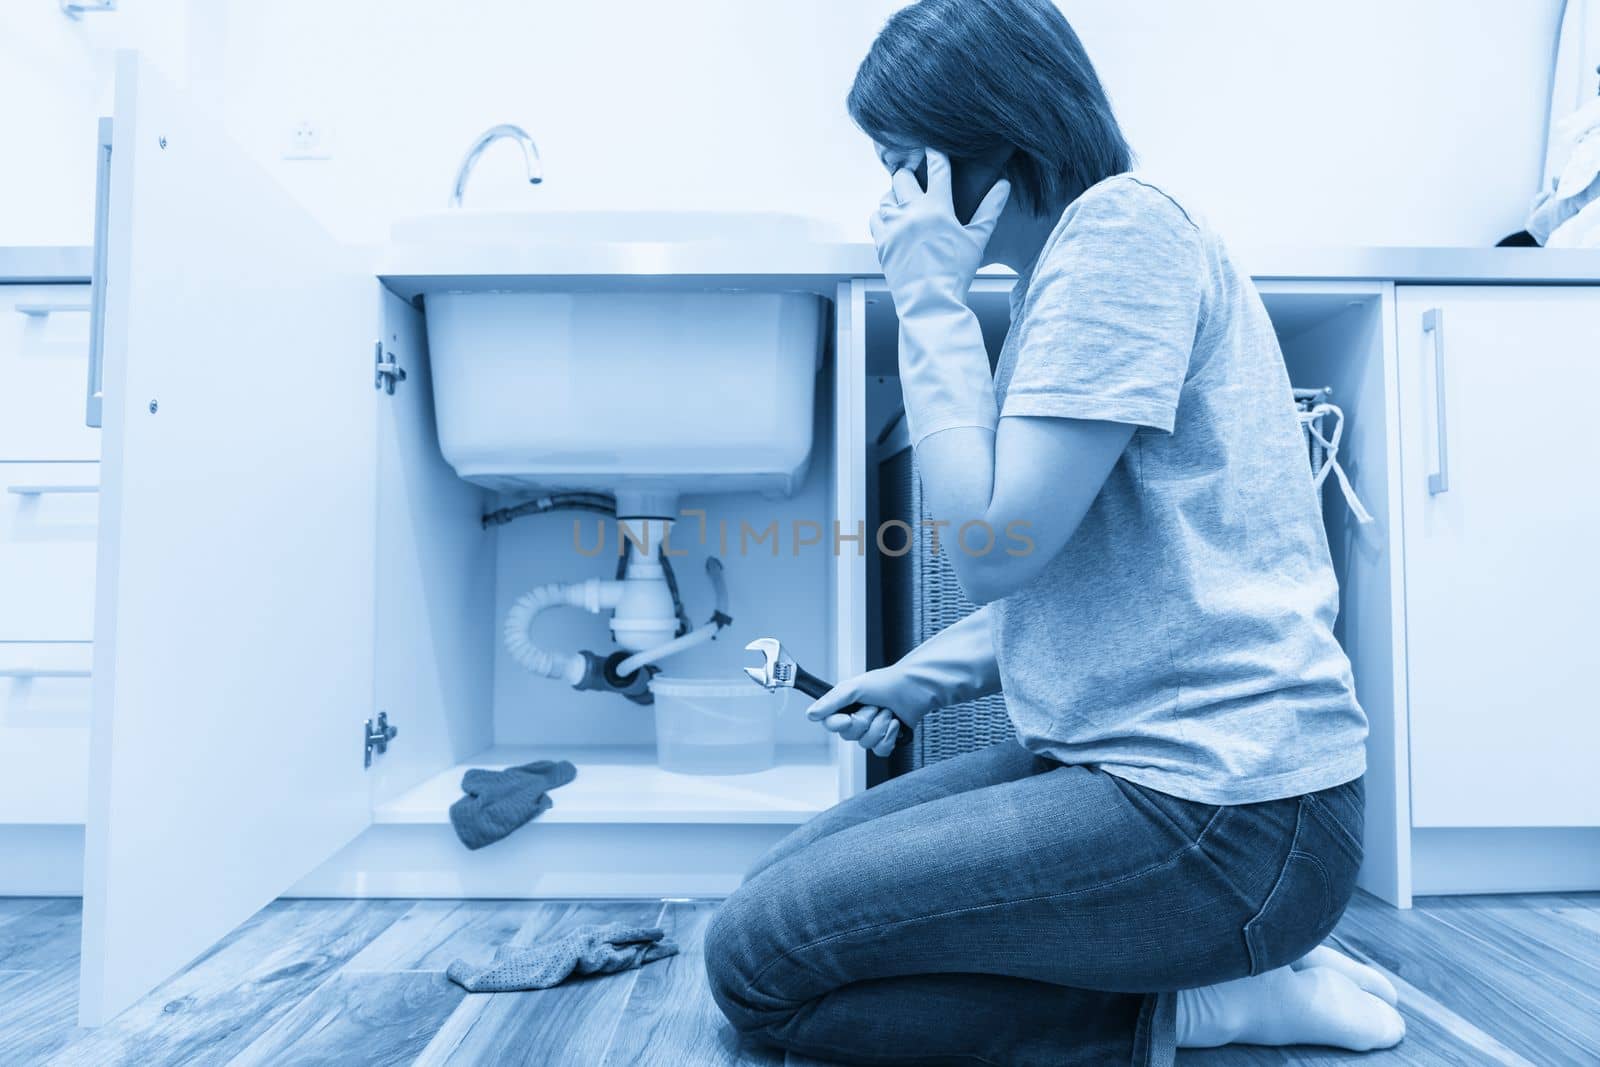 Woman sitting near leaking sink calling for help